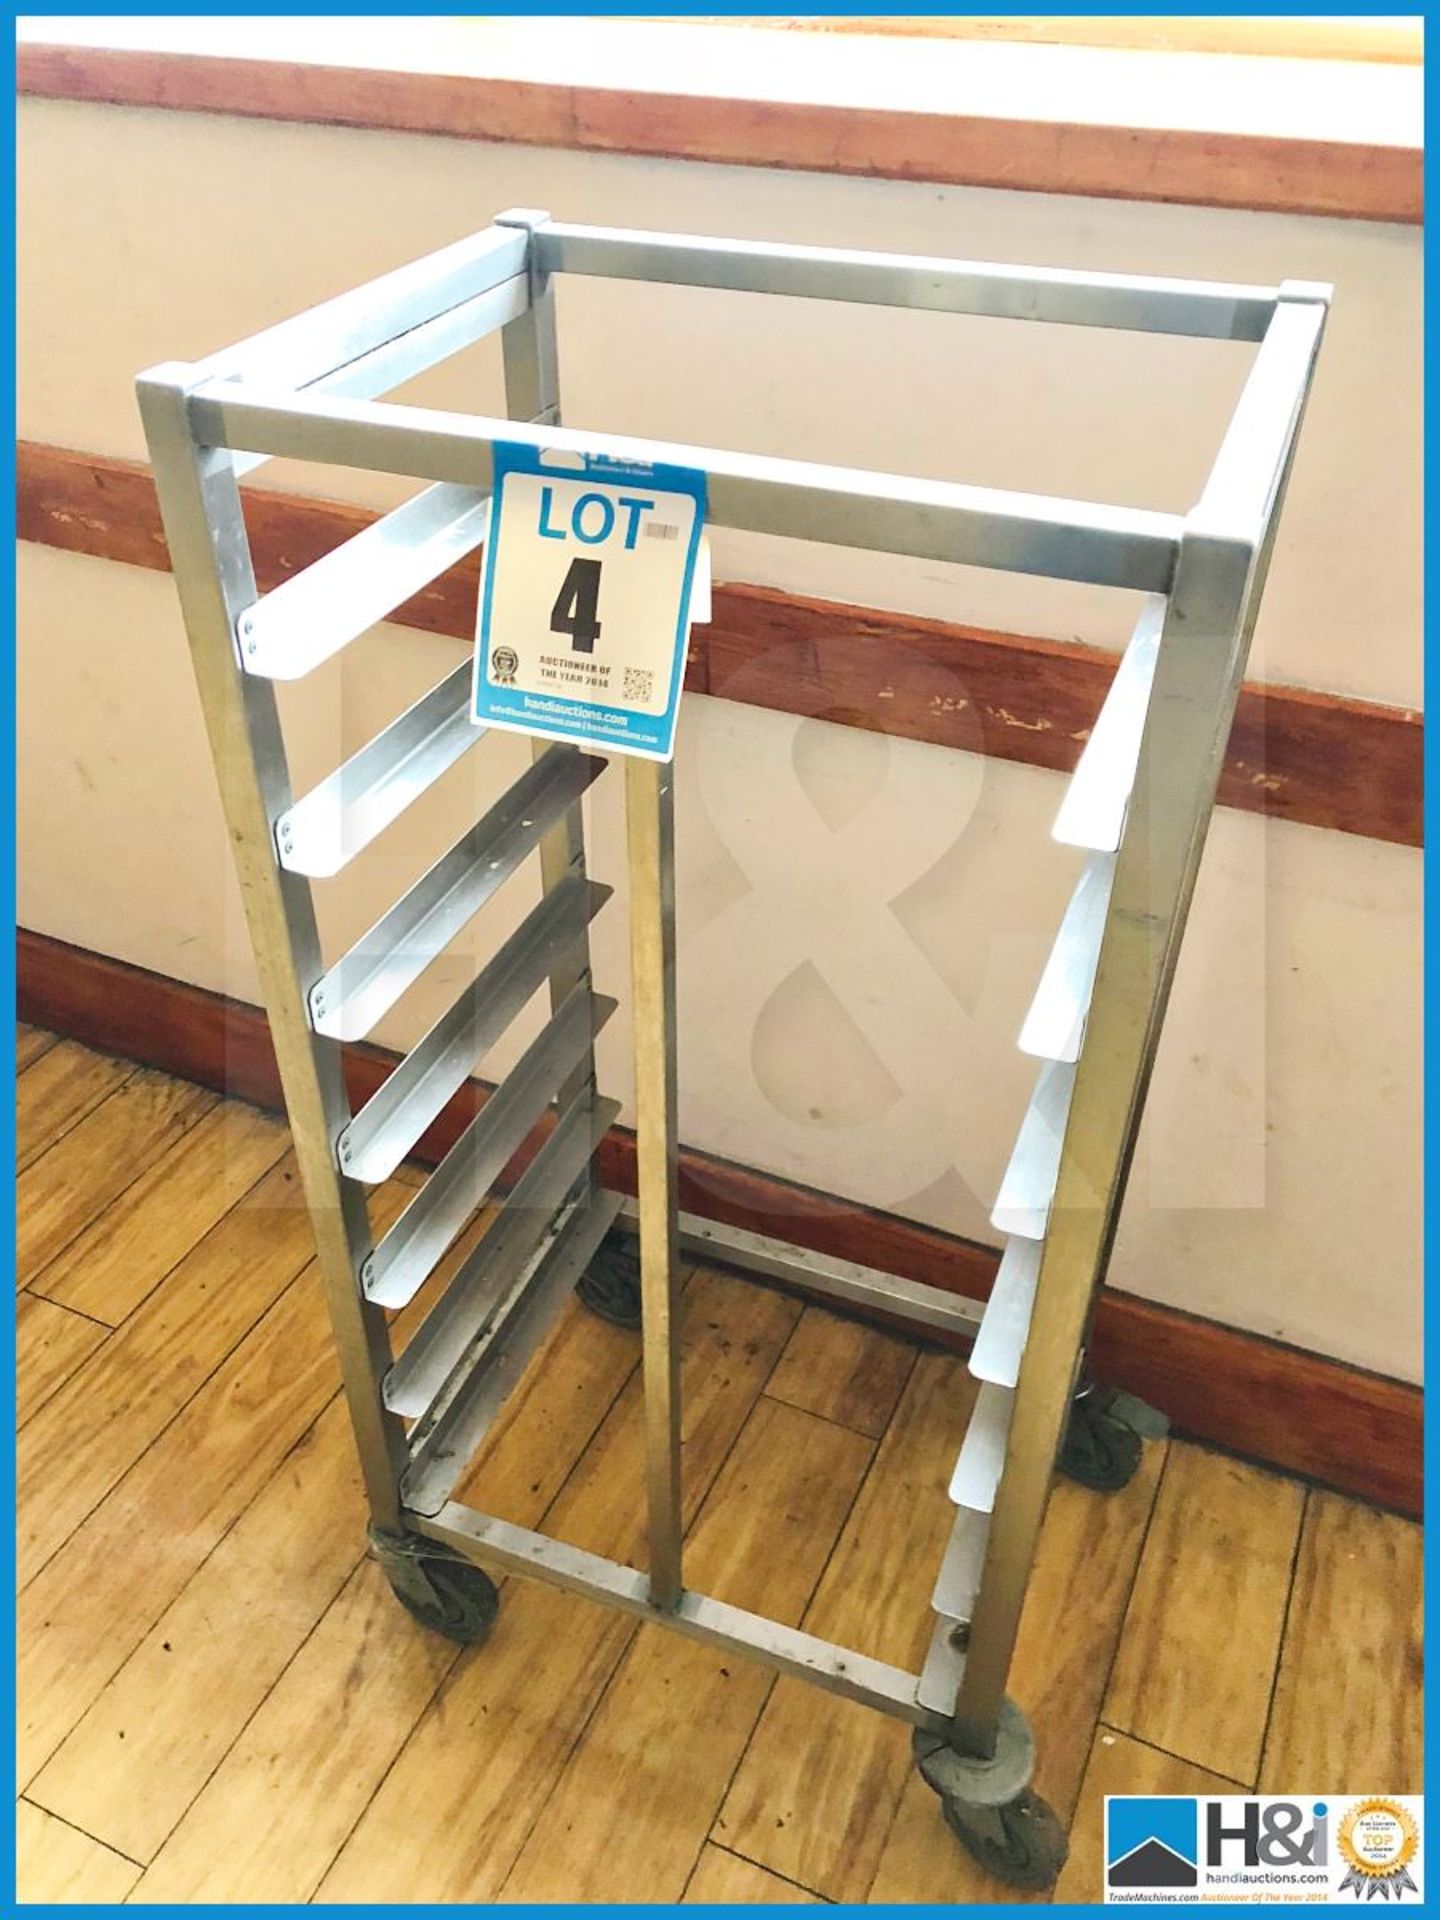 Stainless steel mobile serving tray storage rack 53cm x 40cm x 110cm .